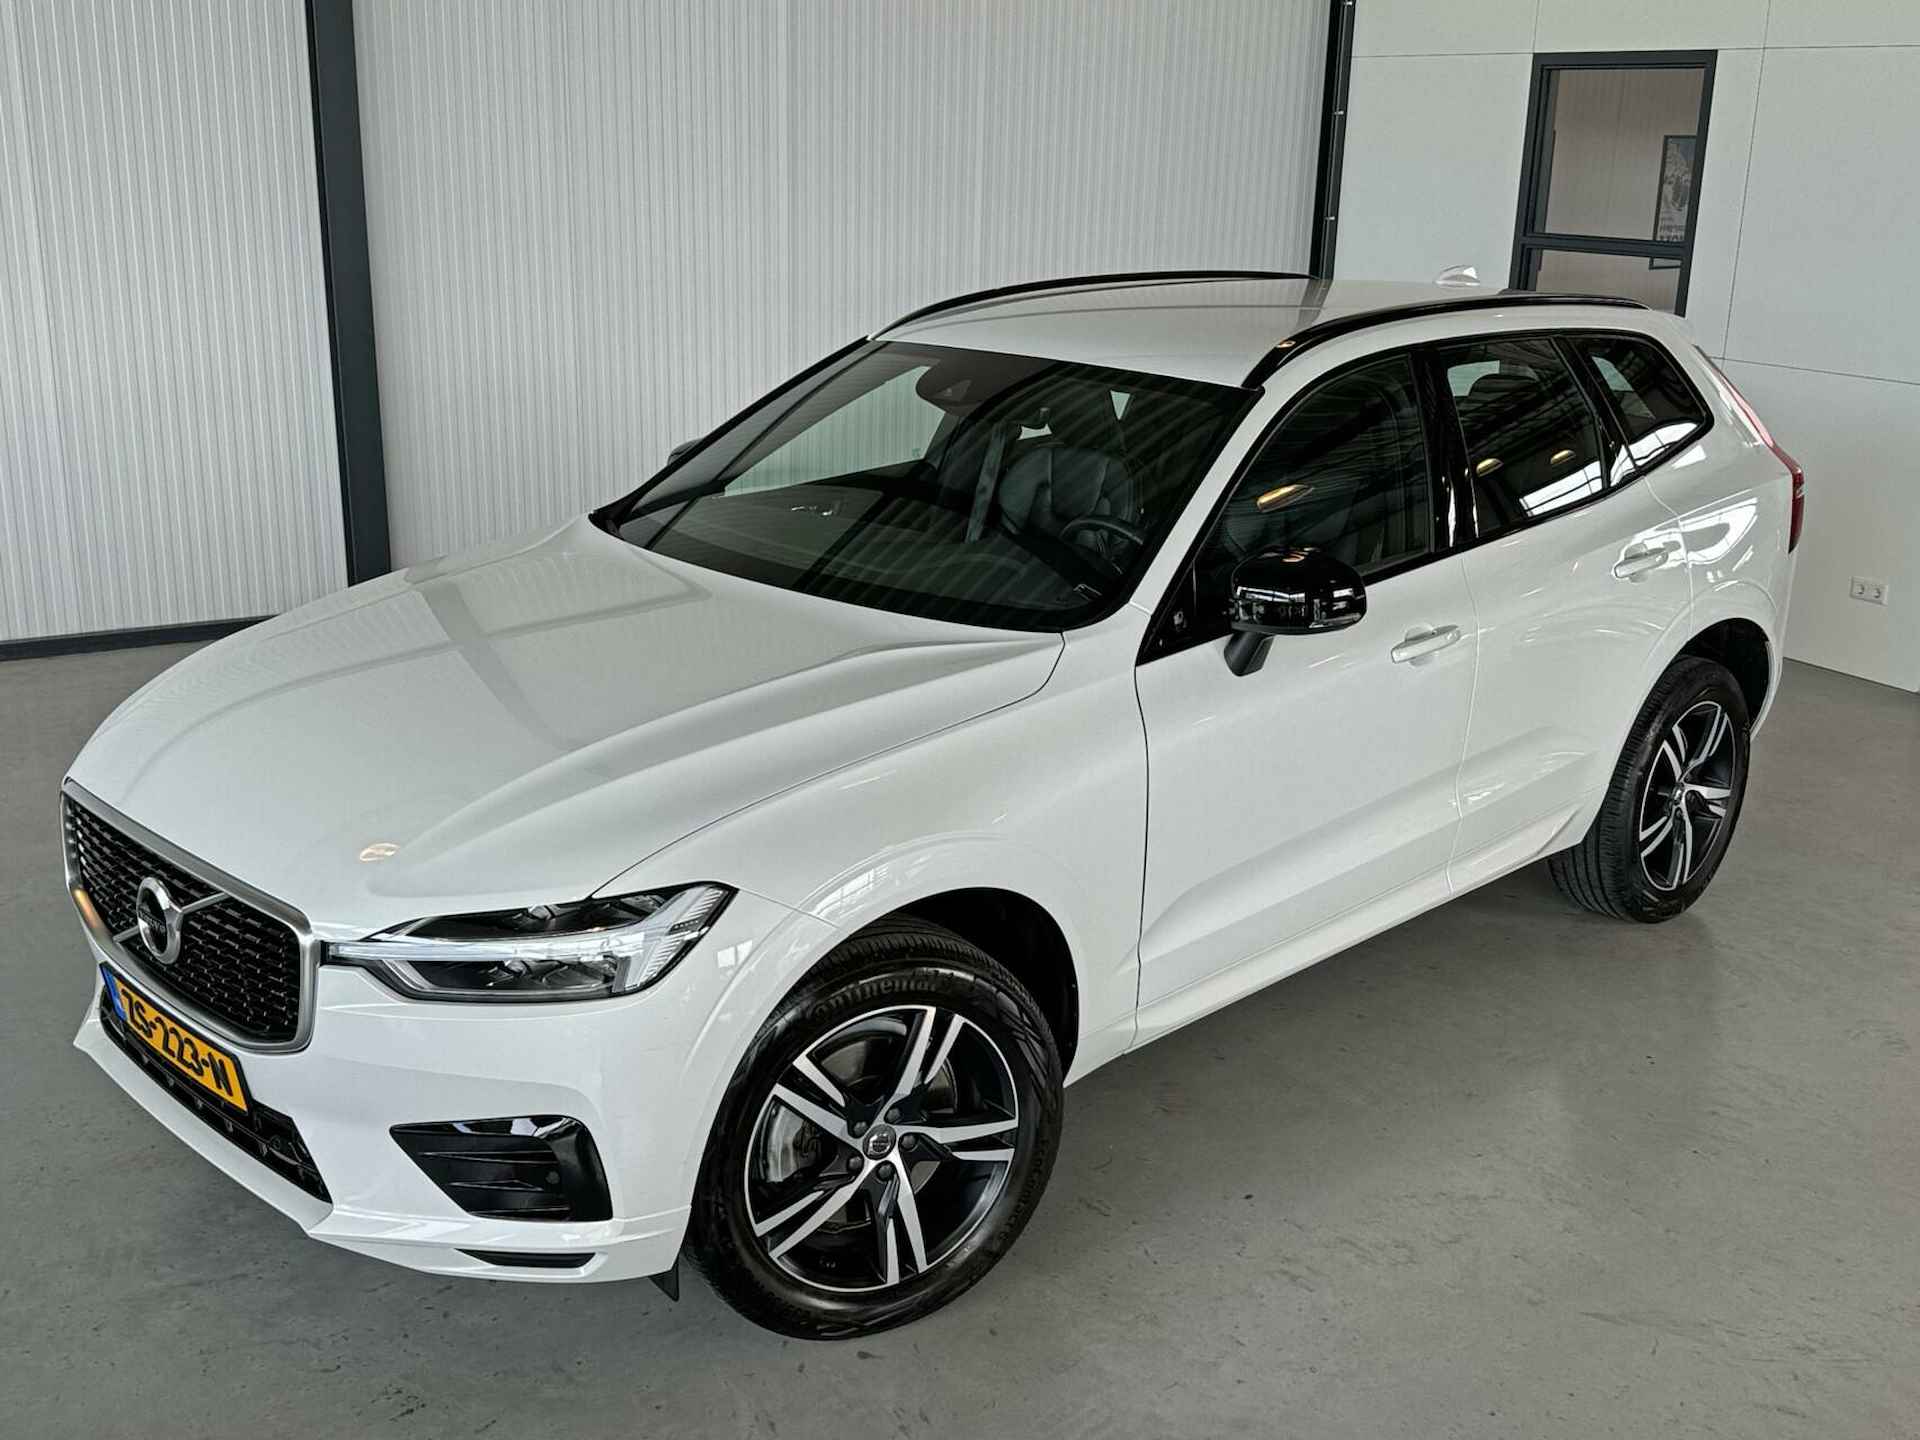 Volvo XC60 2.0 T5 184Kw AWD R-Design Geartronic Inscription Plus|Luchtvering - 33/44